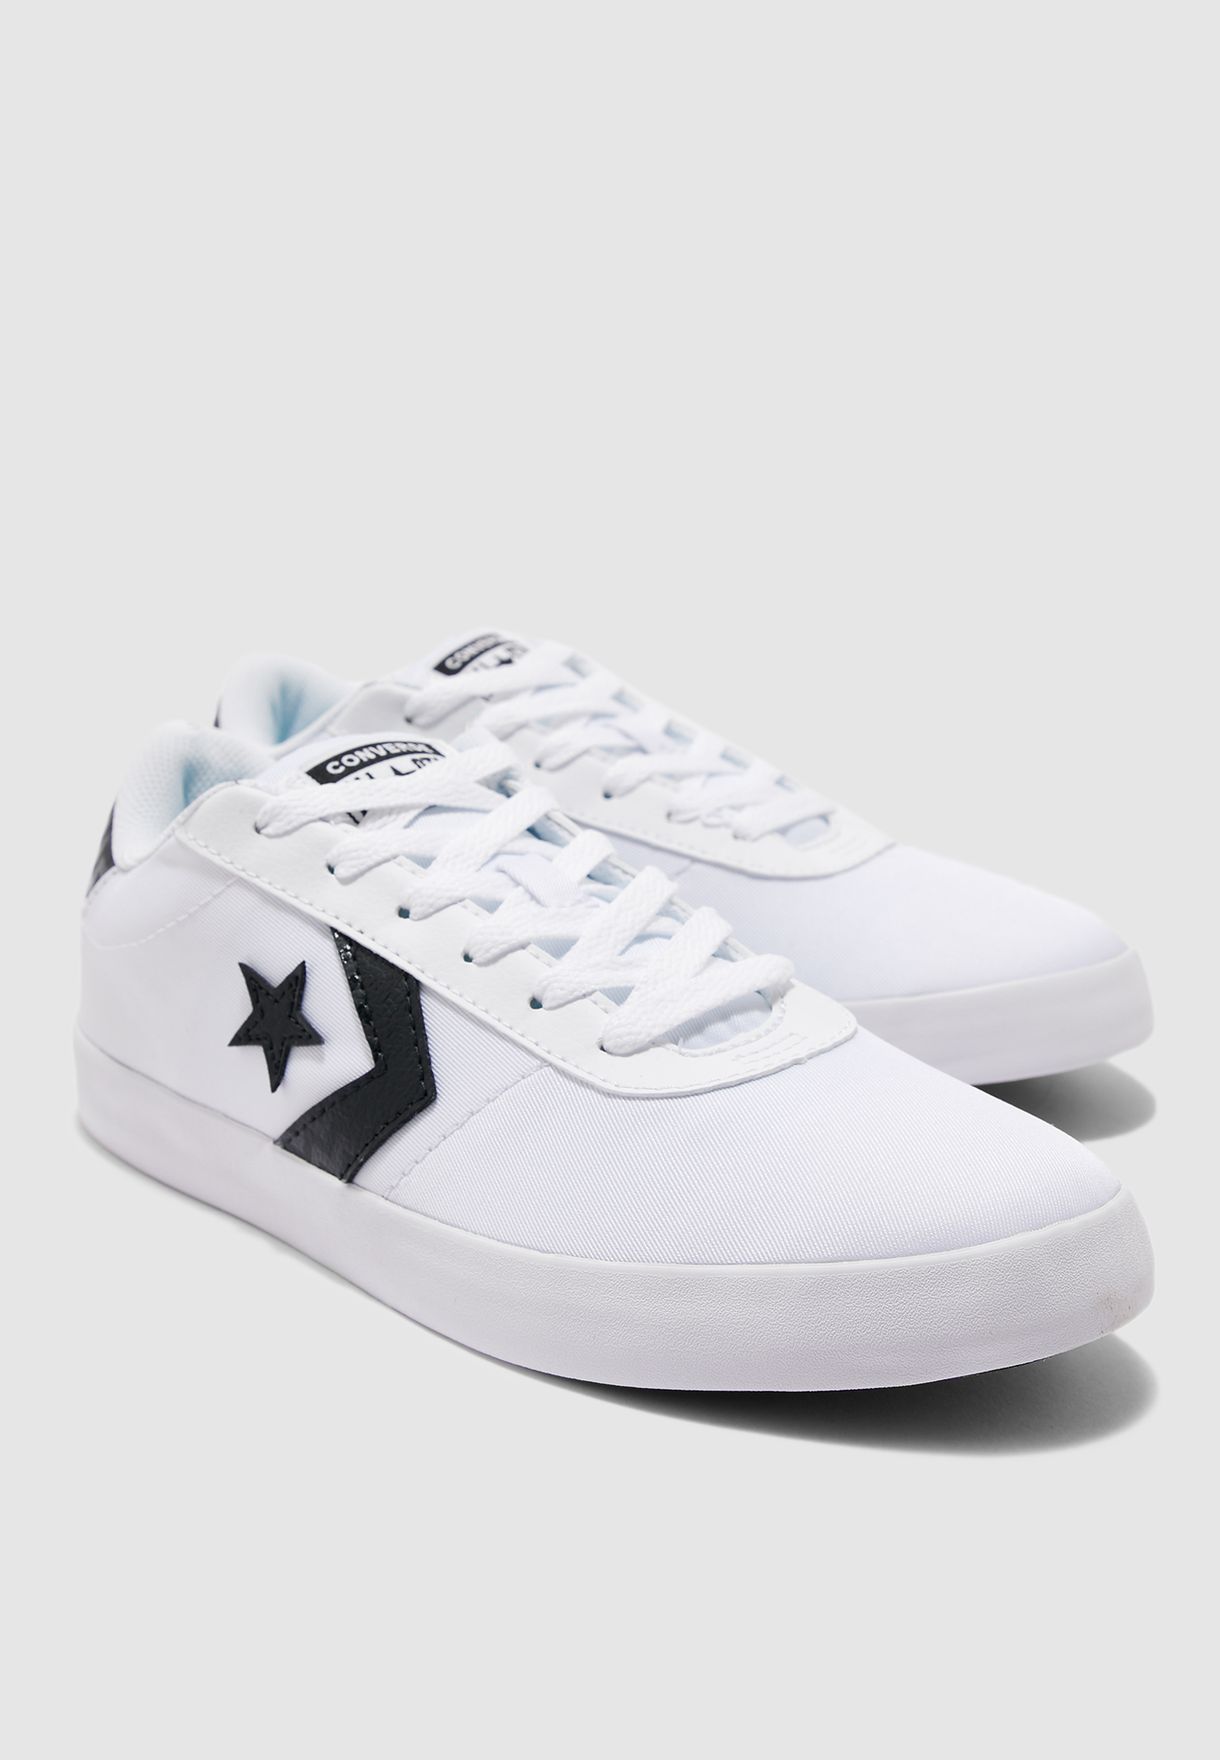 converse shoes in bahrain Online Shopping -